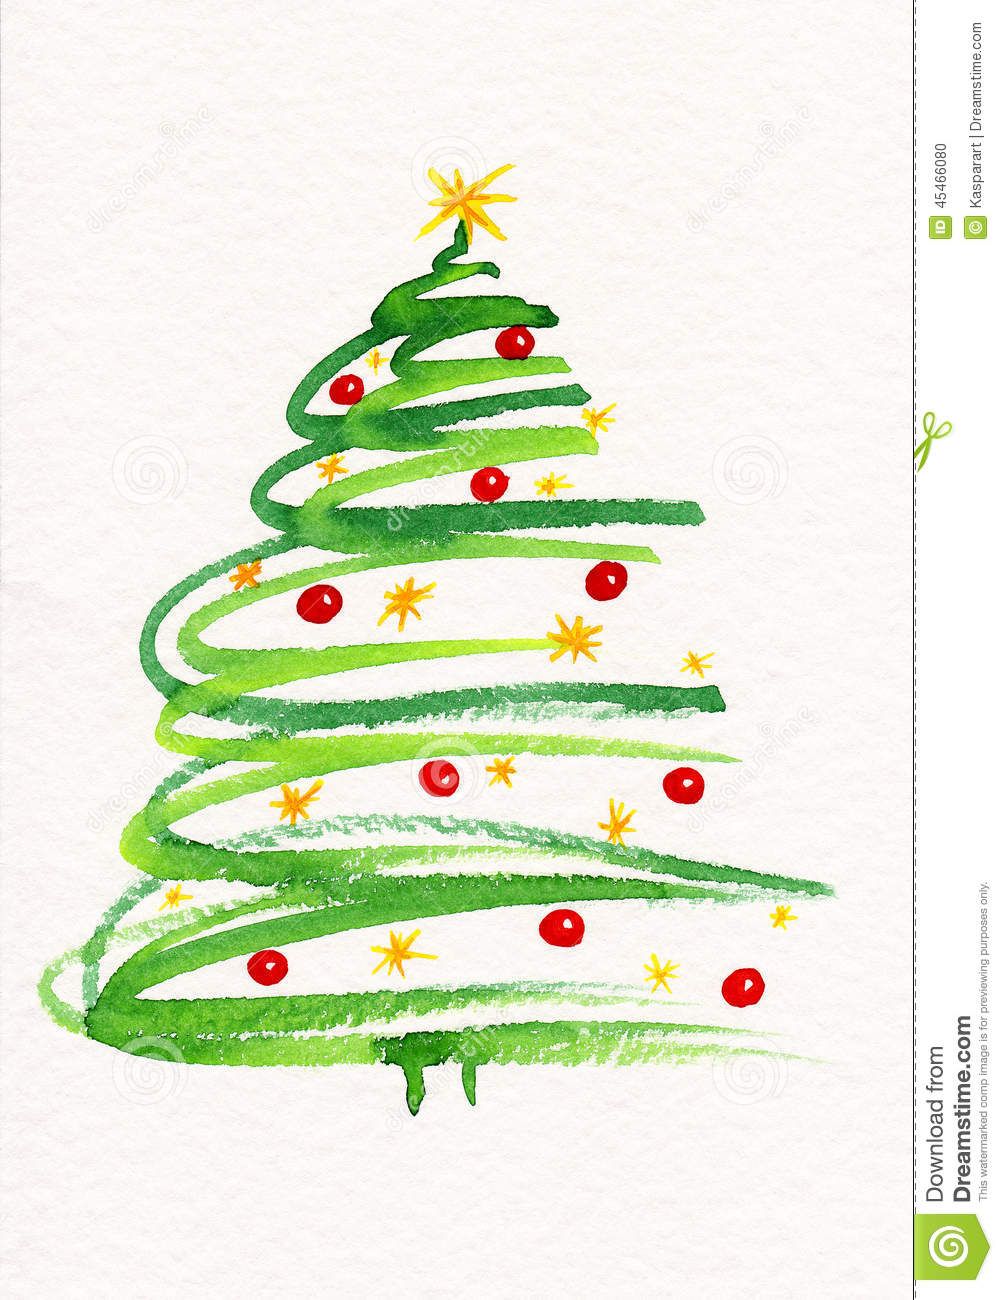 Decorated Christmas Tree Painting Stock Illustration - Illustration Of Card, Decorated: 45466080